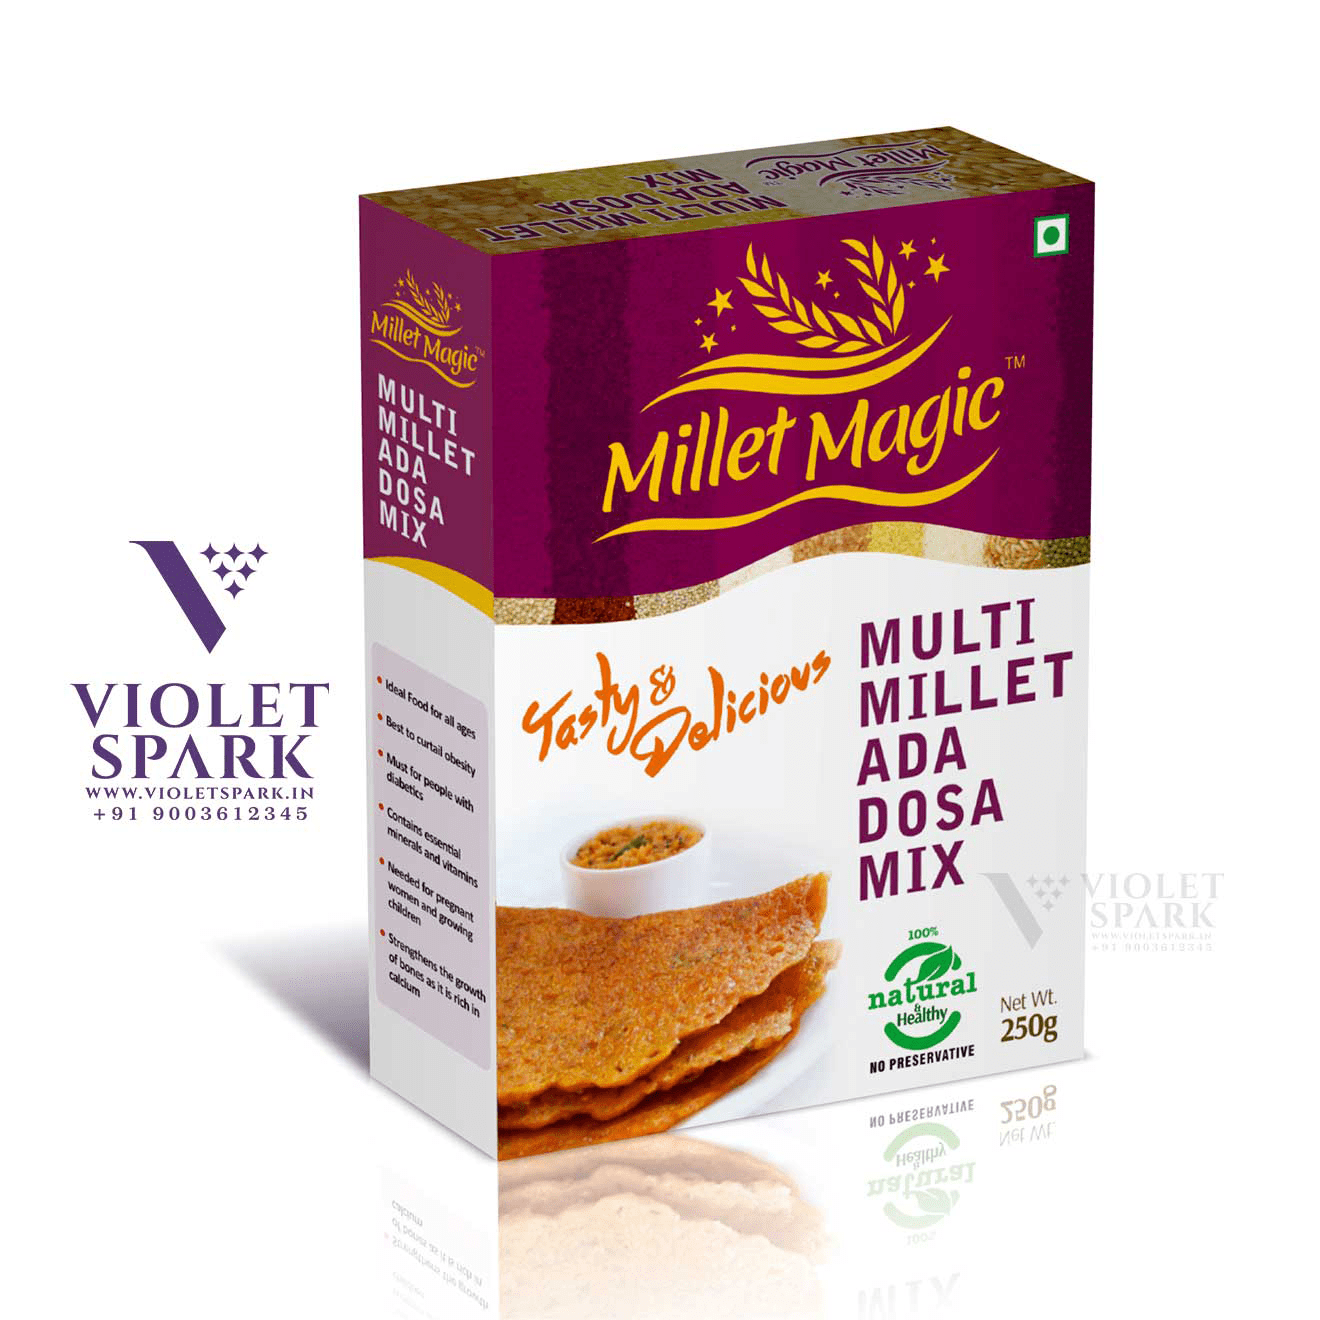 Millet Magic Ada Dosa Mix Graphic Design, Branding Packaging Design in Bangalore by Creative Prints thecreativeprints